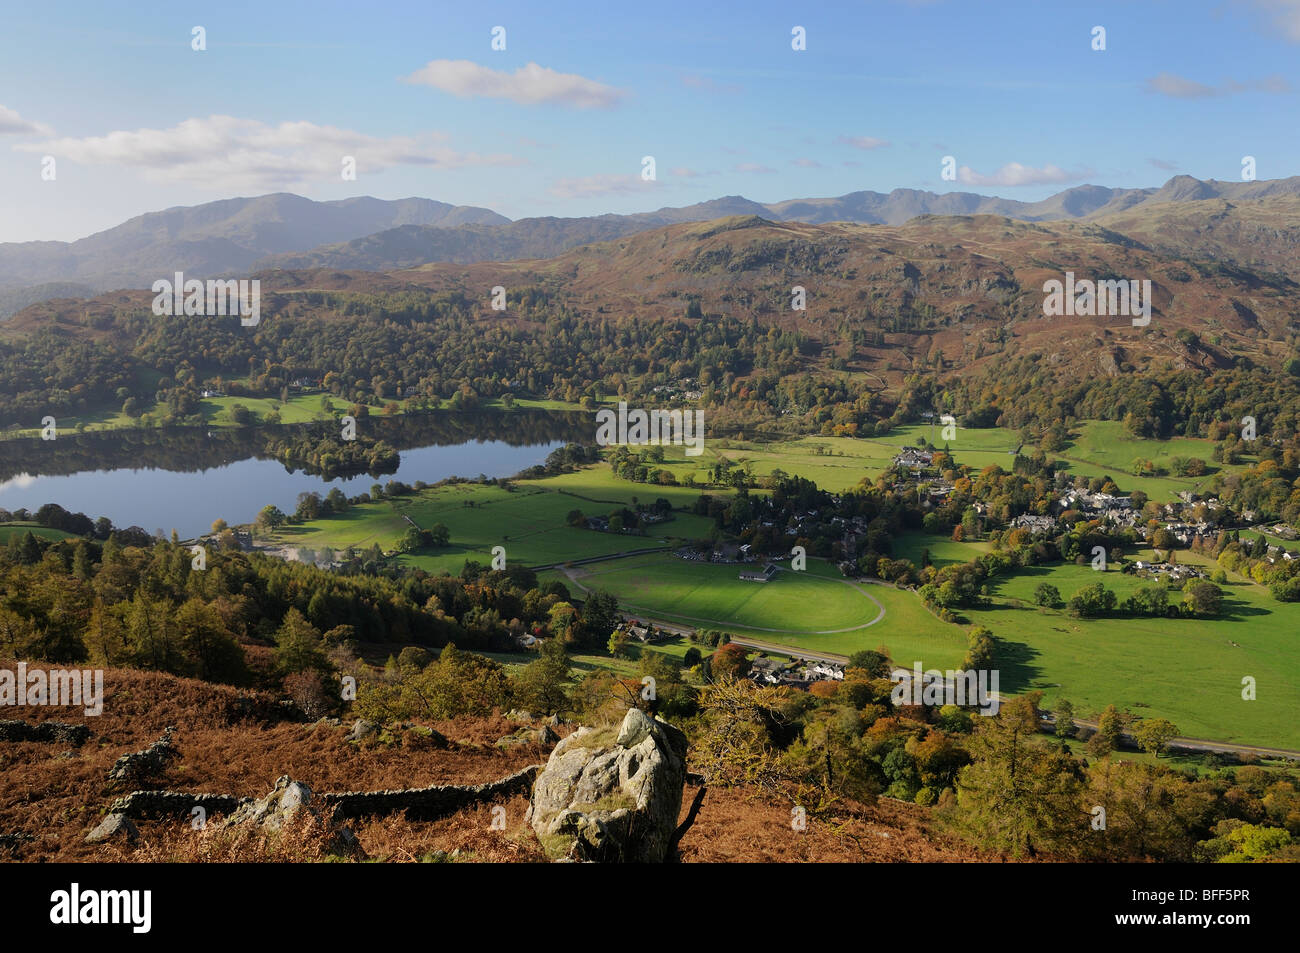 Looking southwest across Grasmere village and lake to Silver How from the slopes of Heron Pike with the Coniston fells visible Stock Photo